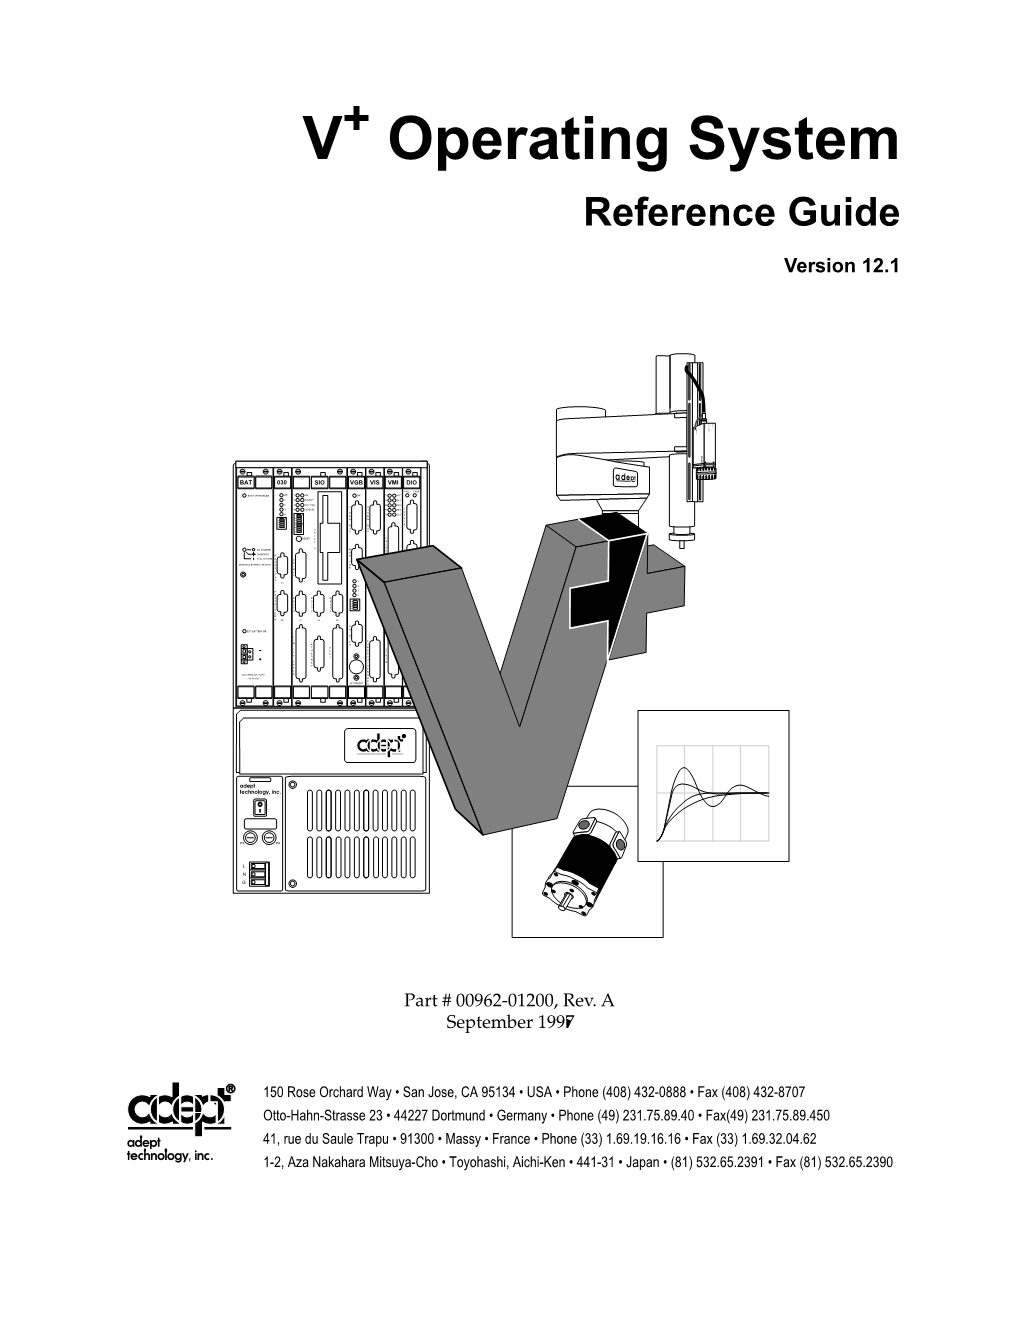 V+ Operating System Reference Guide